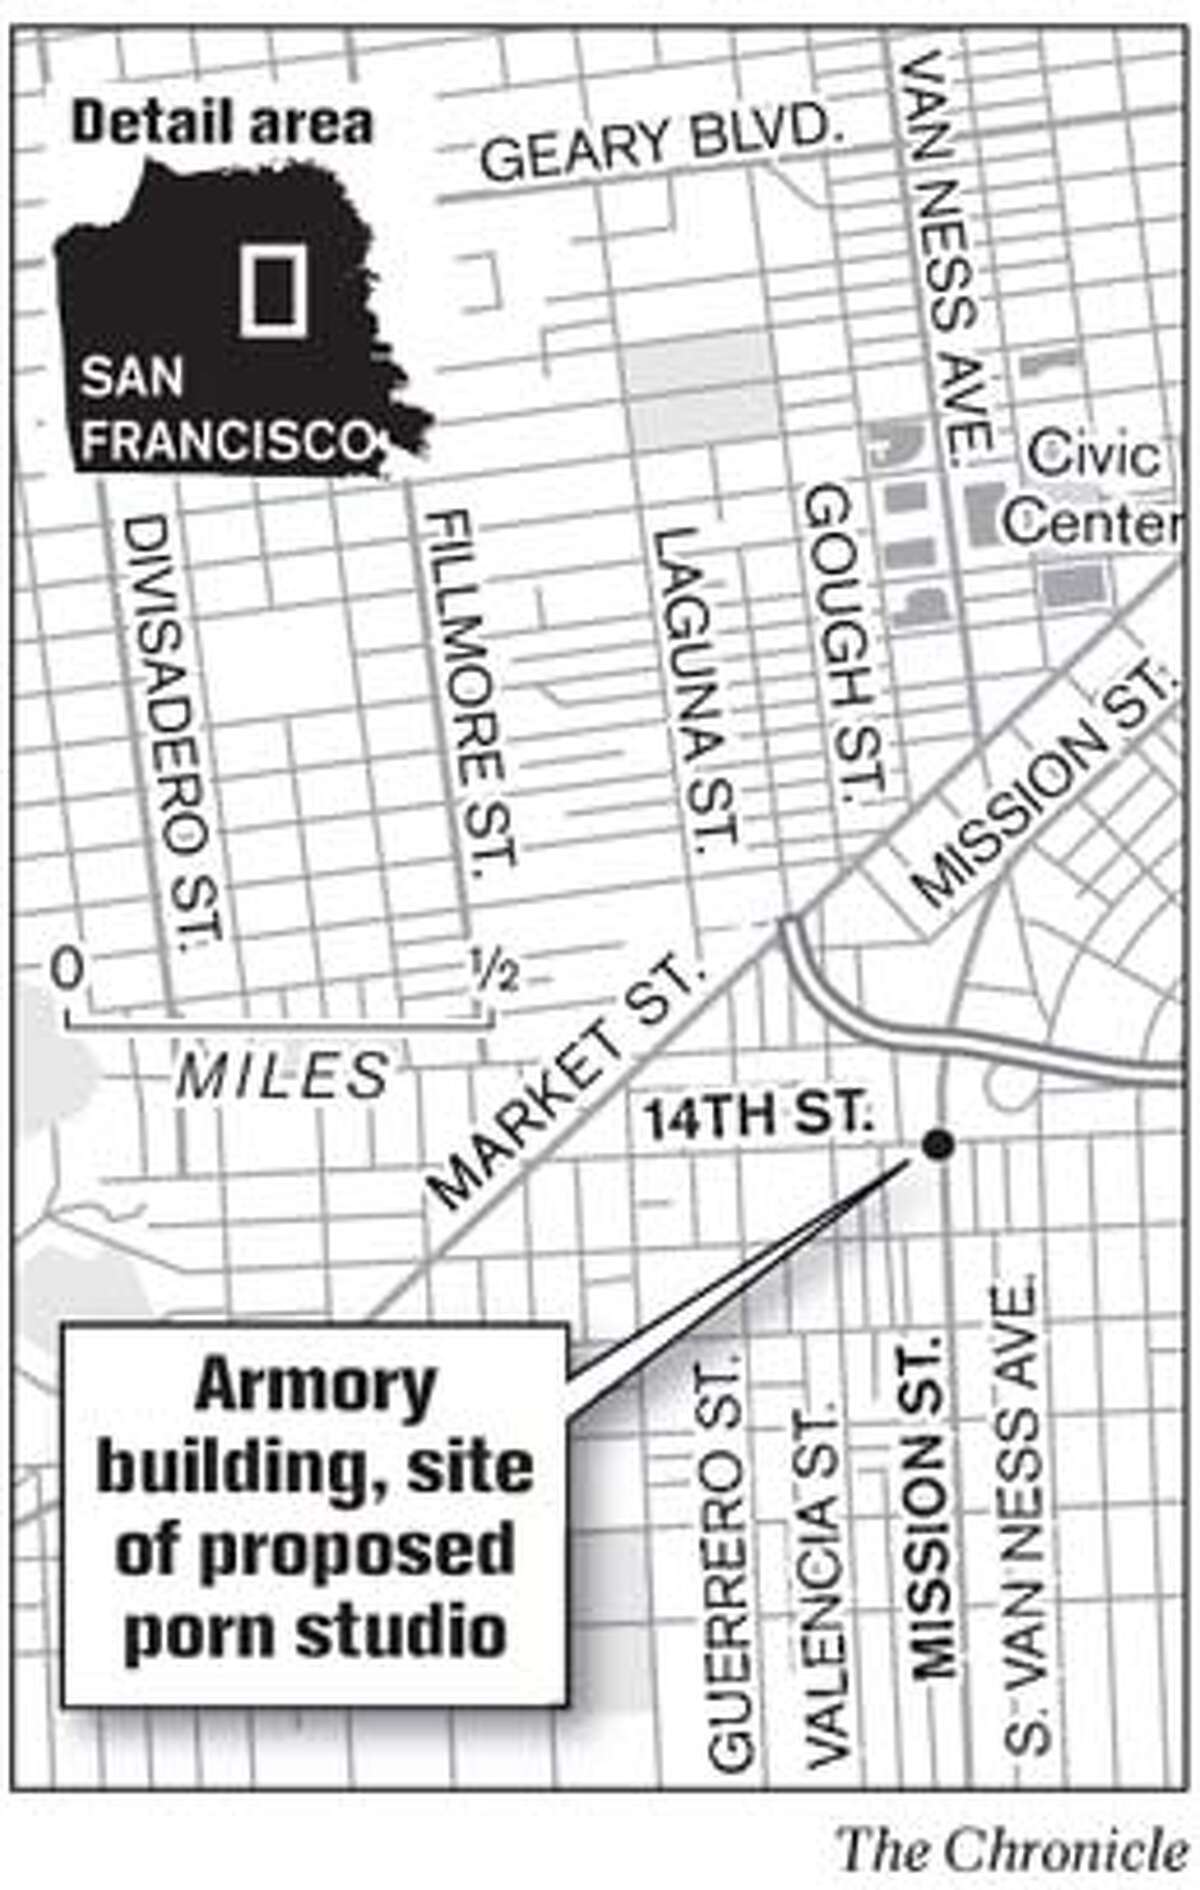 Armory building, site of proposed porn studio. Chronicle Graphic